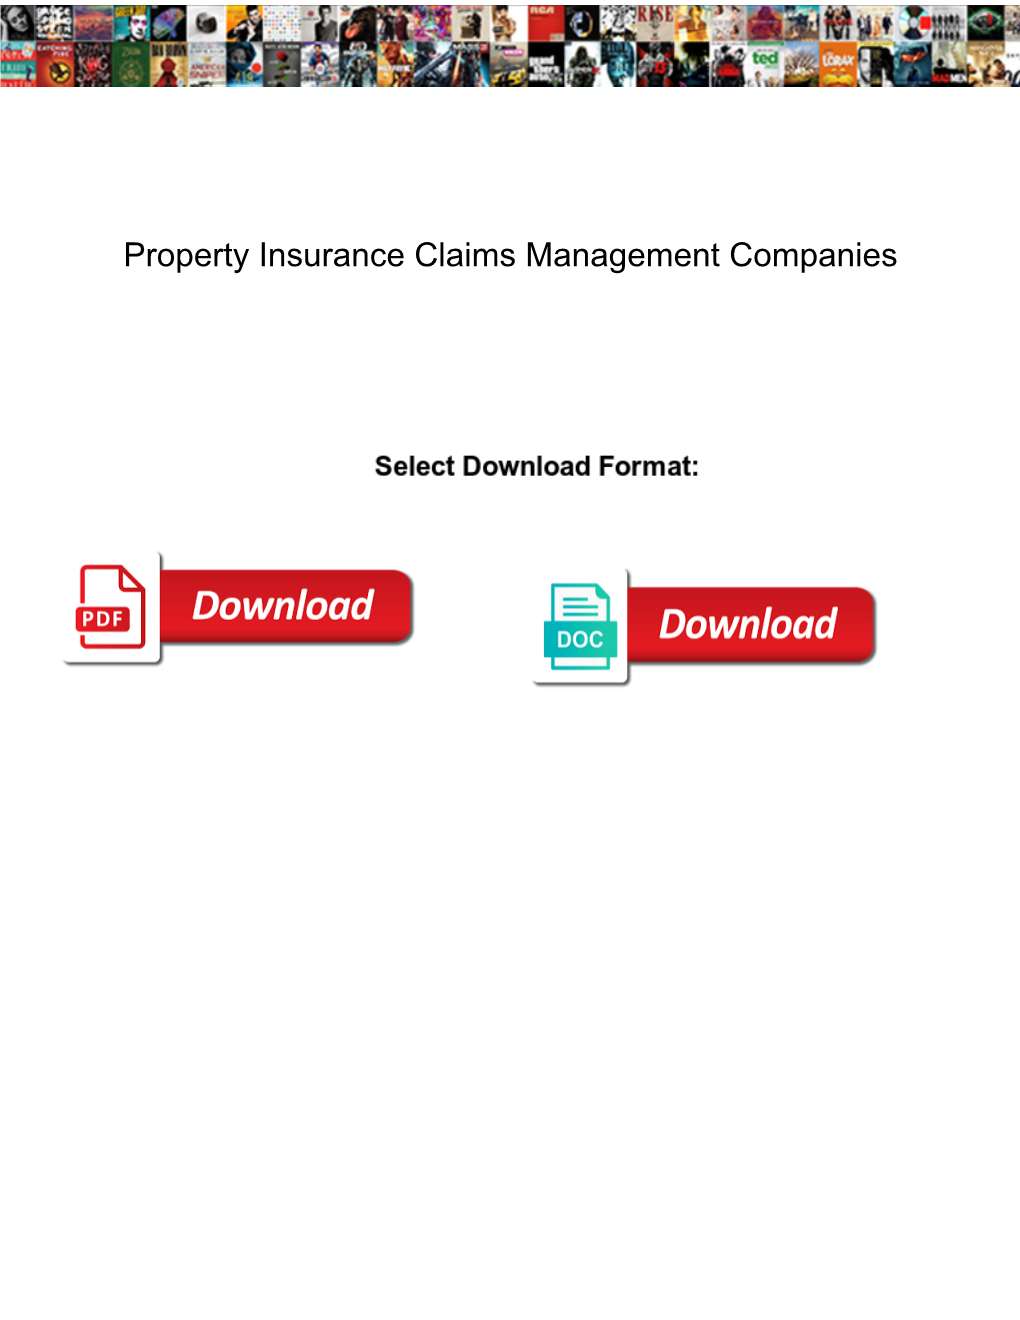 Property Insurance Claims Management Companies